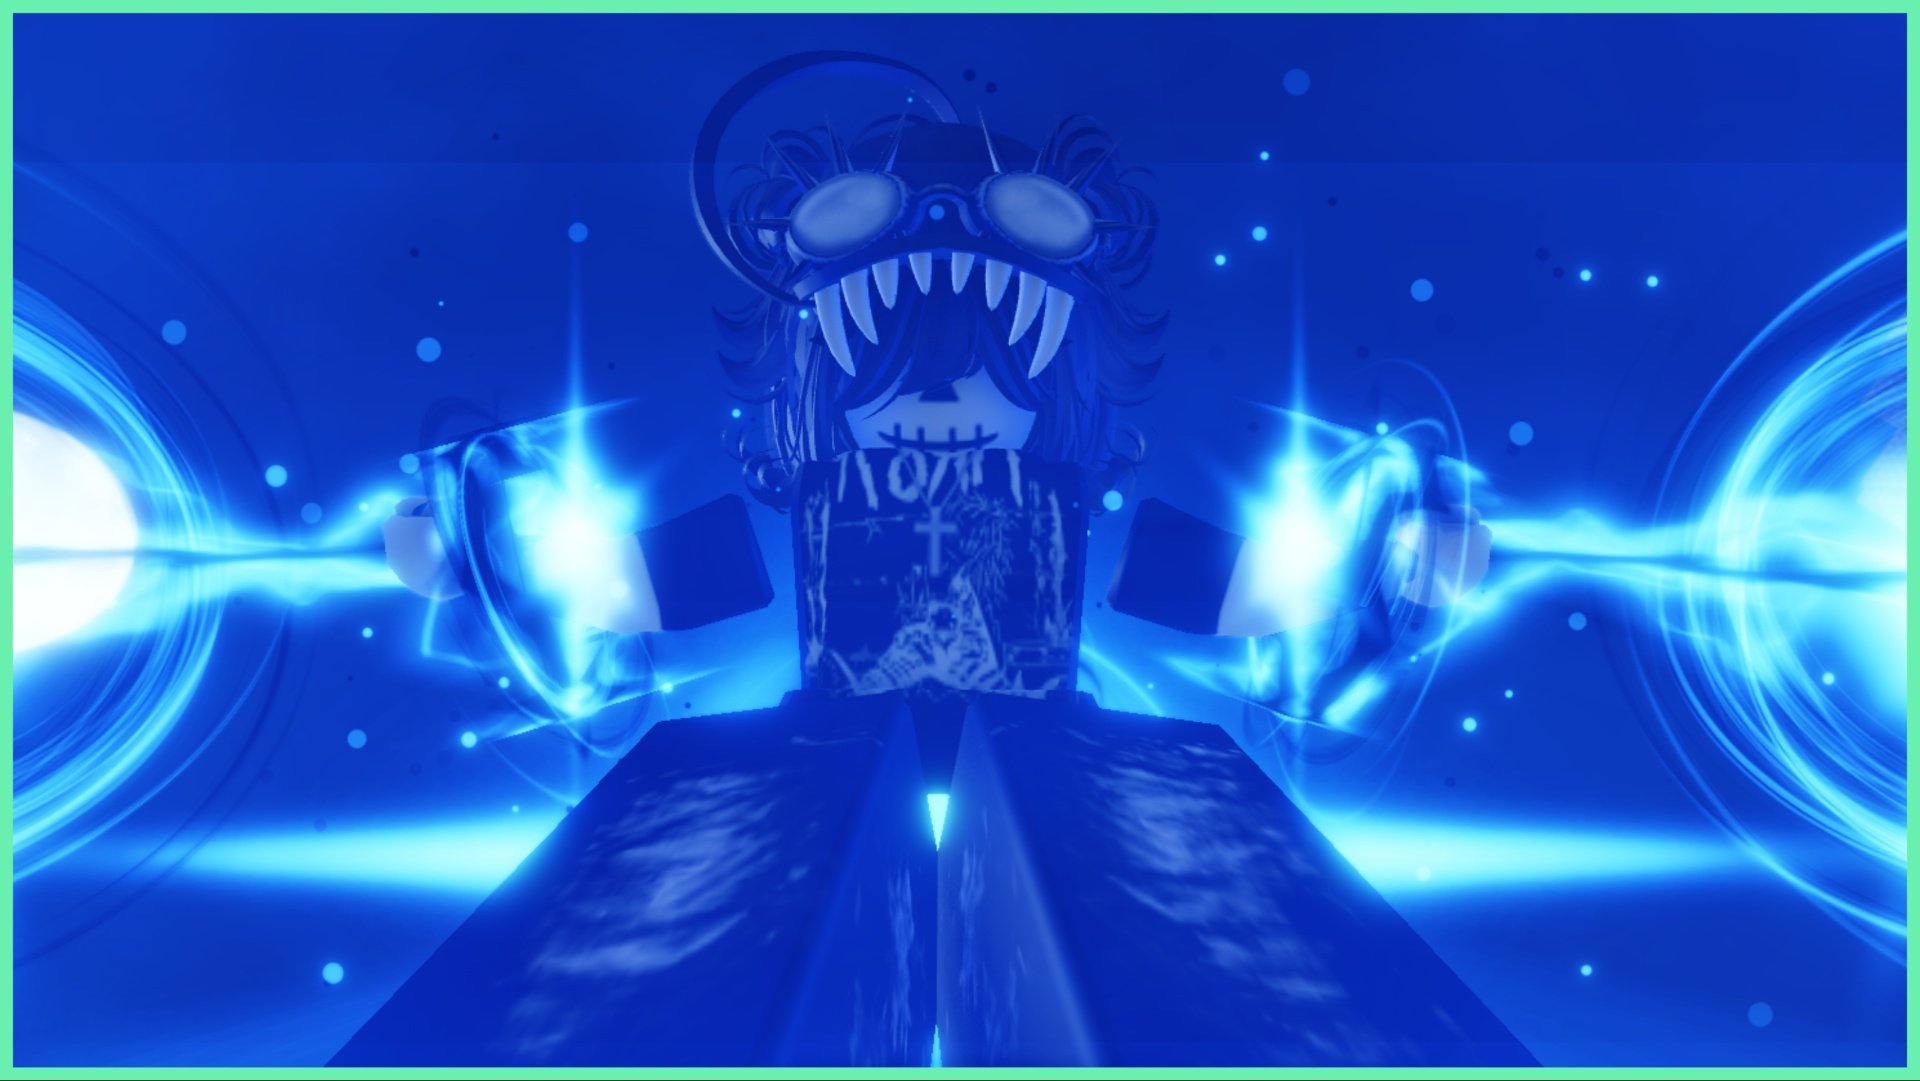 The image shows my avatar with the bounded aura which is masking the screen in a blue tint. The bottom up view of her shows her arms suspended to either side in the auras chains